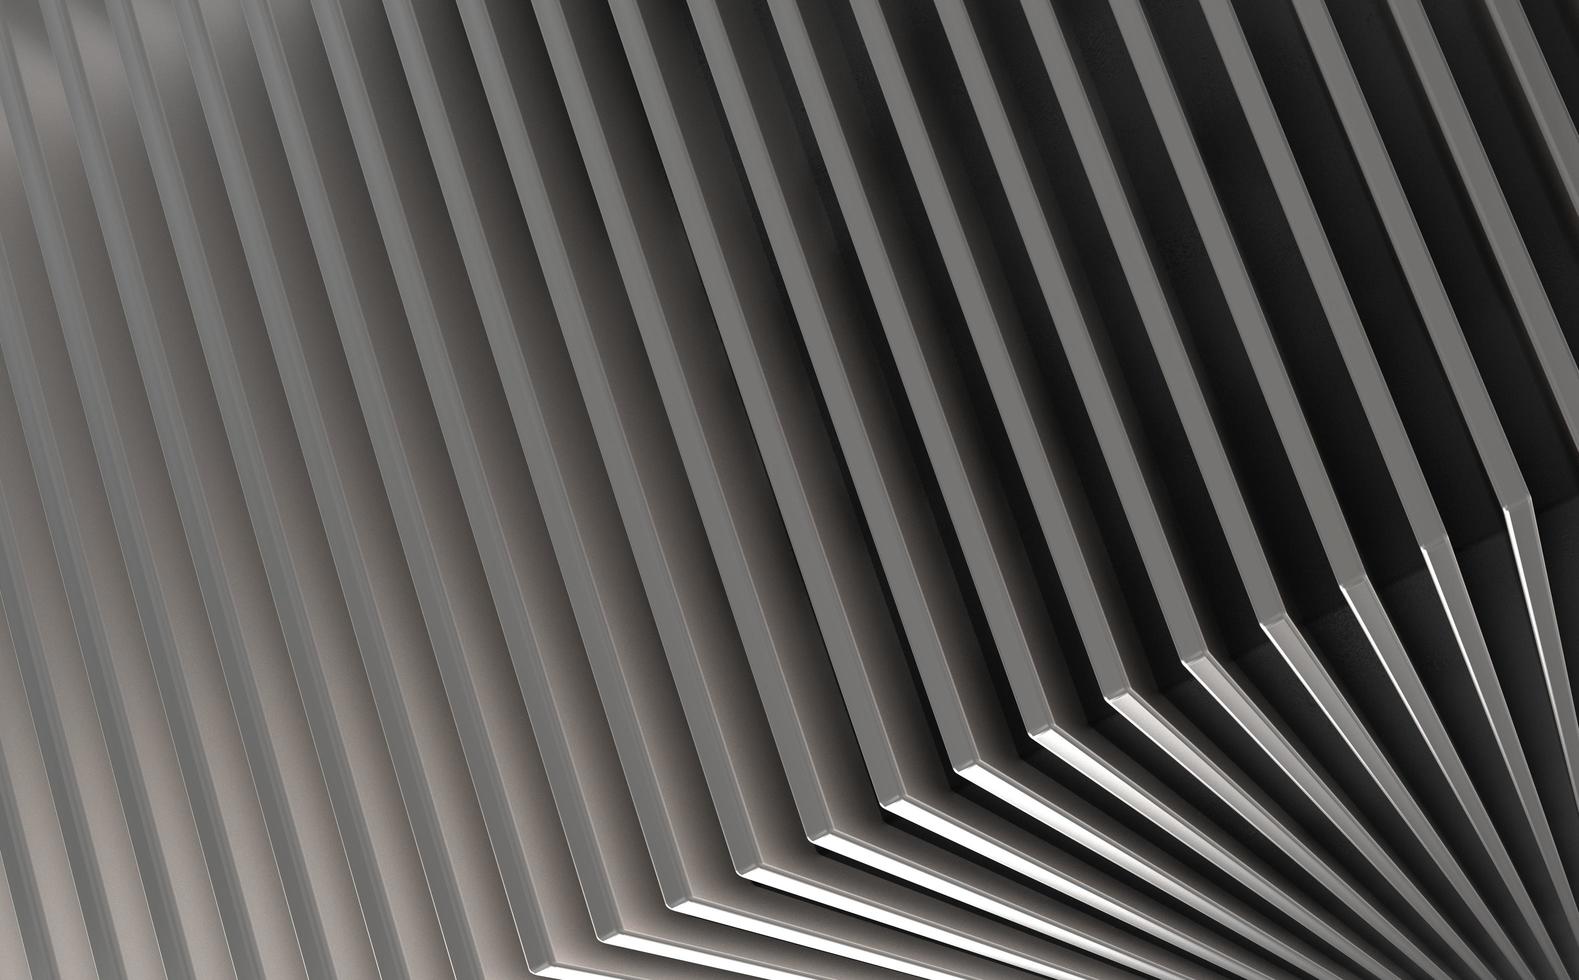 The abstract metal pattern background photo